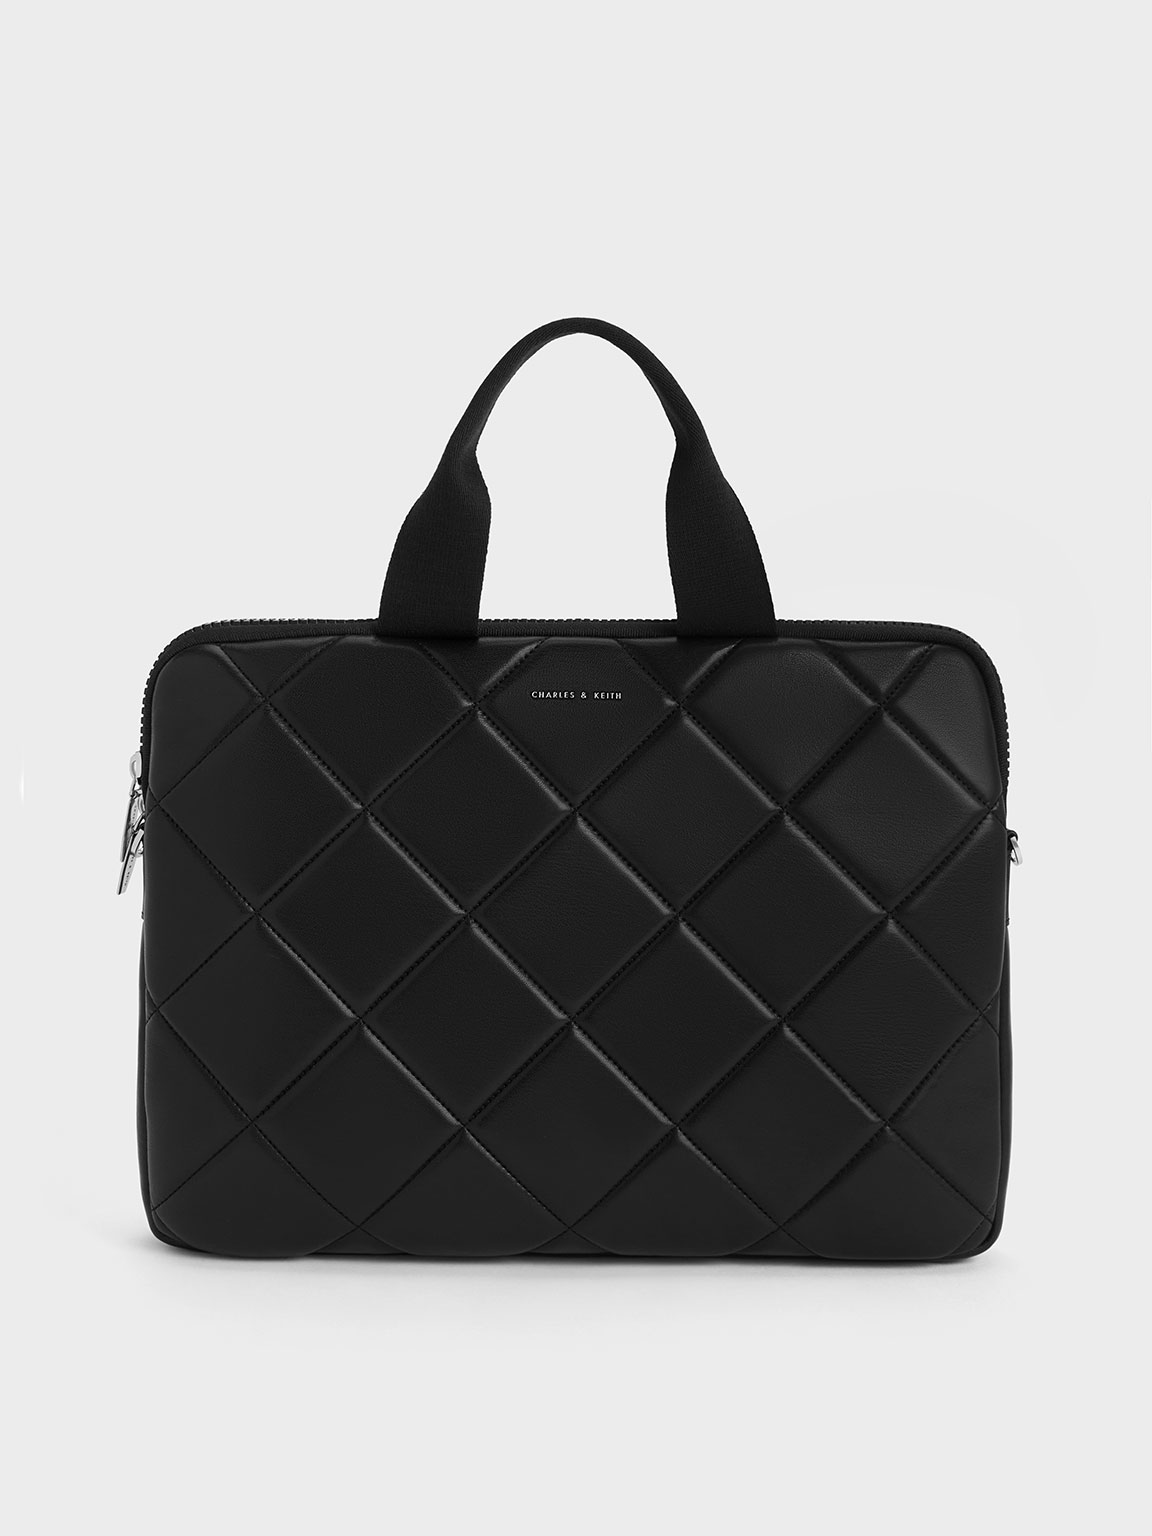 Charles & Keith Aubrielle Quilted Laptop Bag In Black